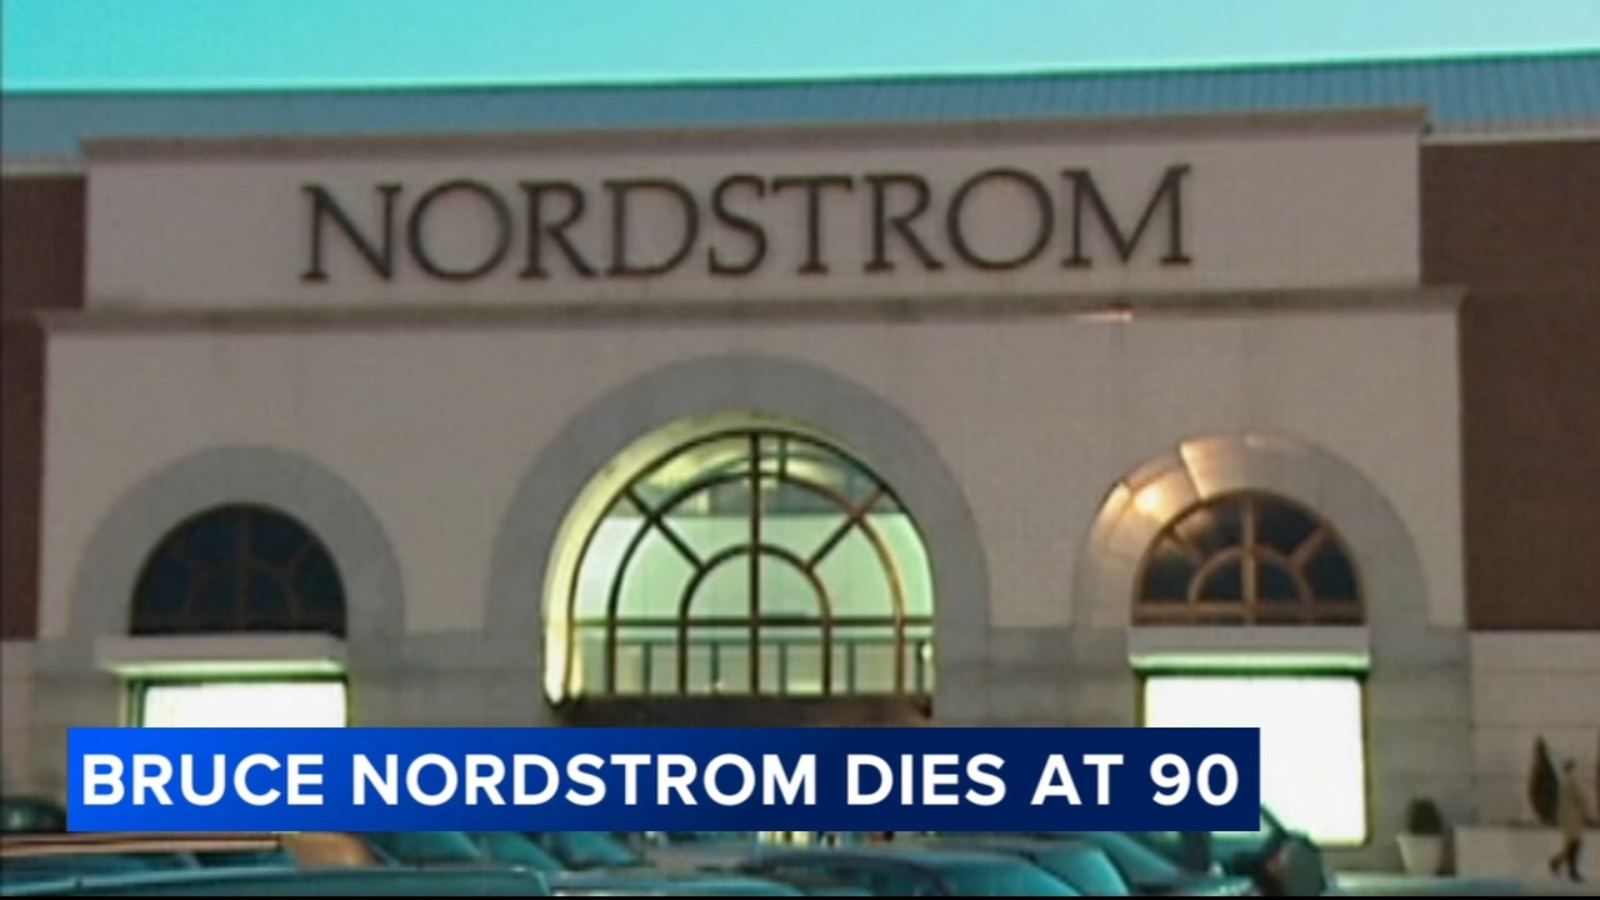 Bruce Nordstrom, who helped grow family-led department store chain, dies at 90 [Video]